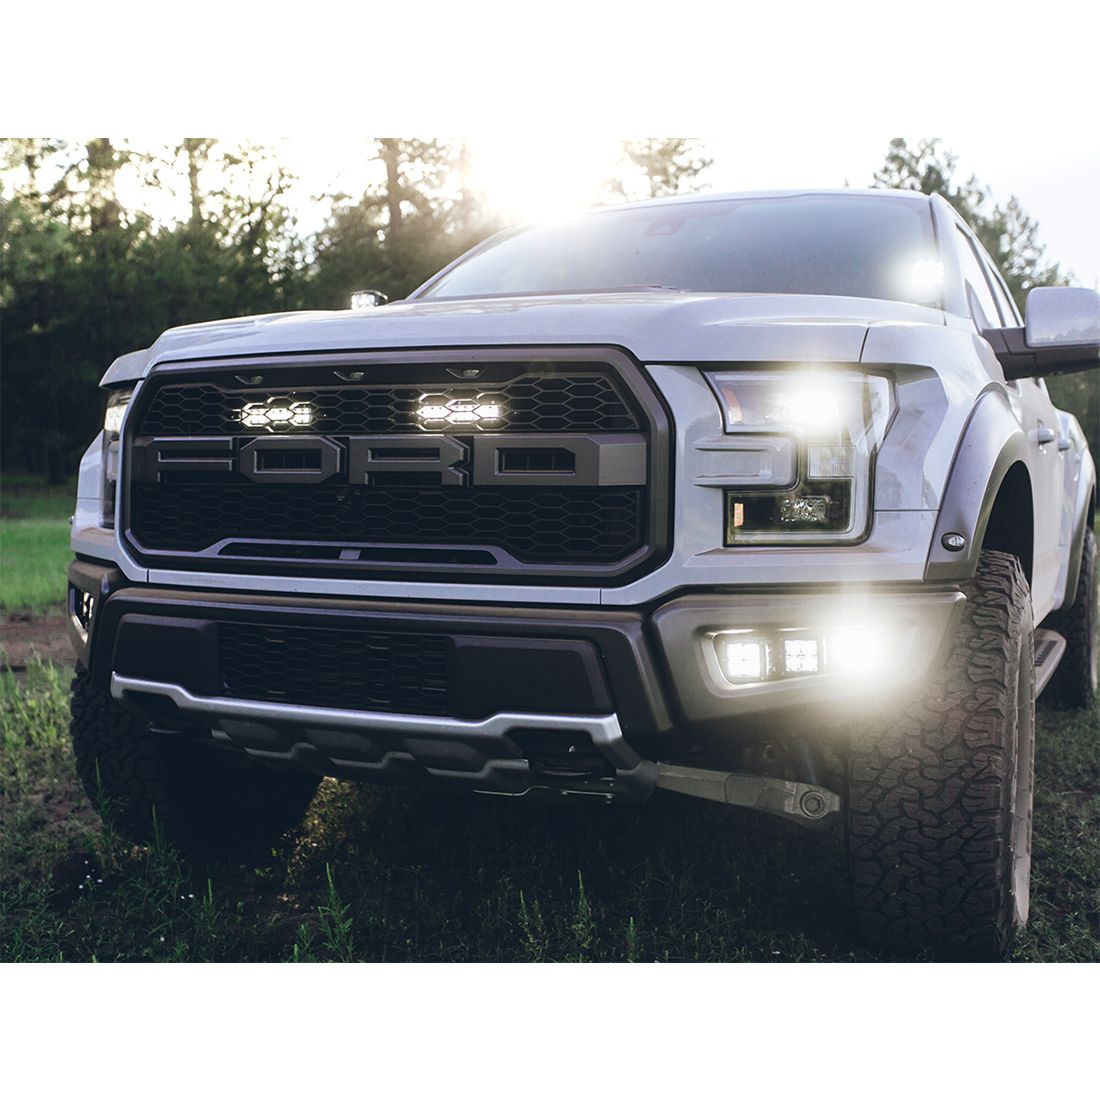 RIGID Industries 17-18 Ford Raptor Fog Light Kit Includes Mounts and 6 D-Series